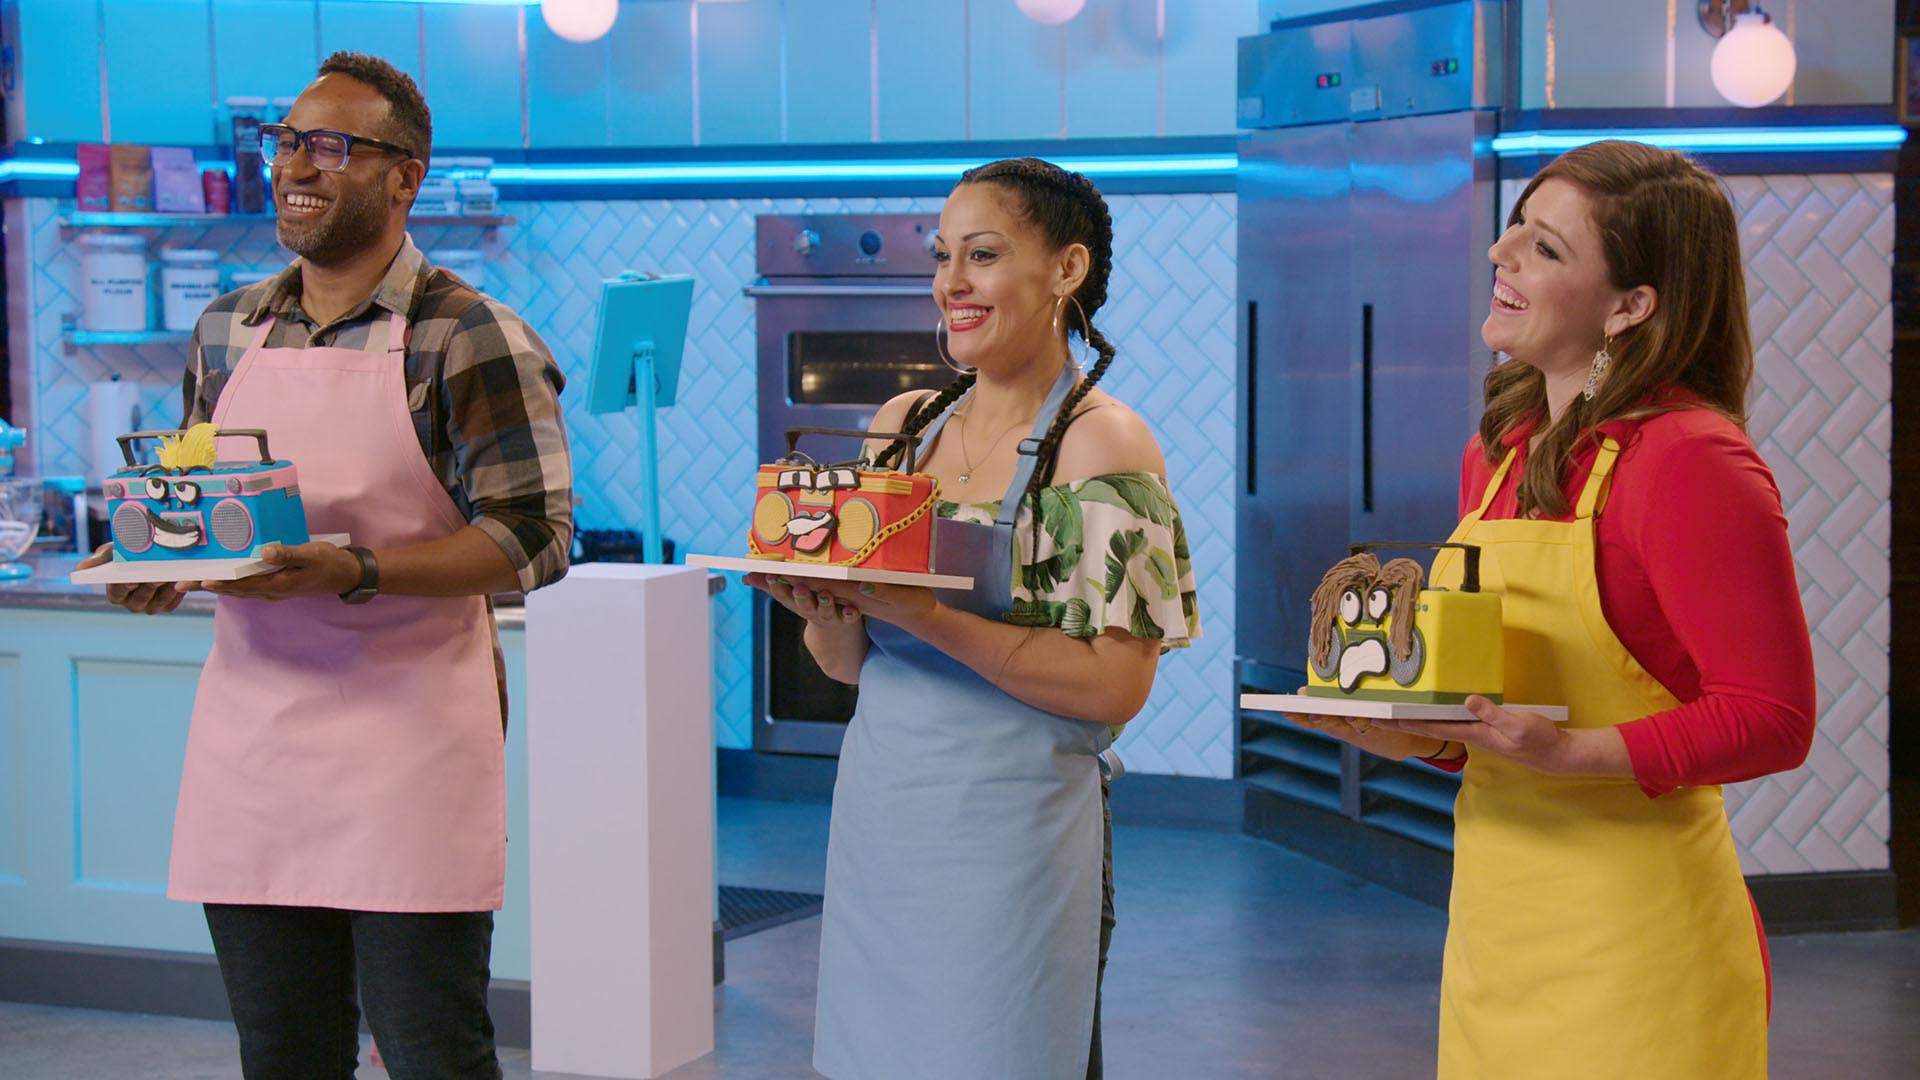 Five Food and Cooking Shows You Can Stream Right Now to Help Up Your Quarantine Kitchen Game